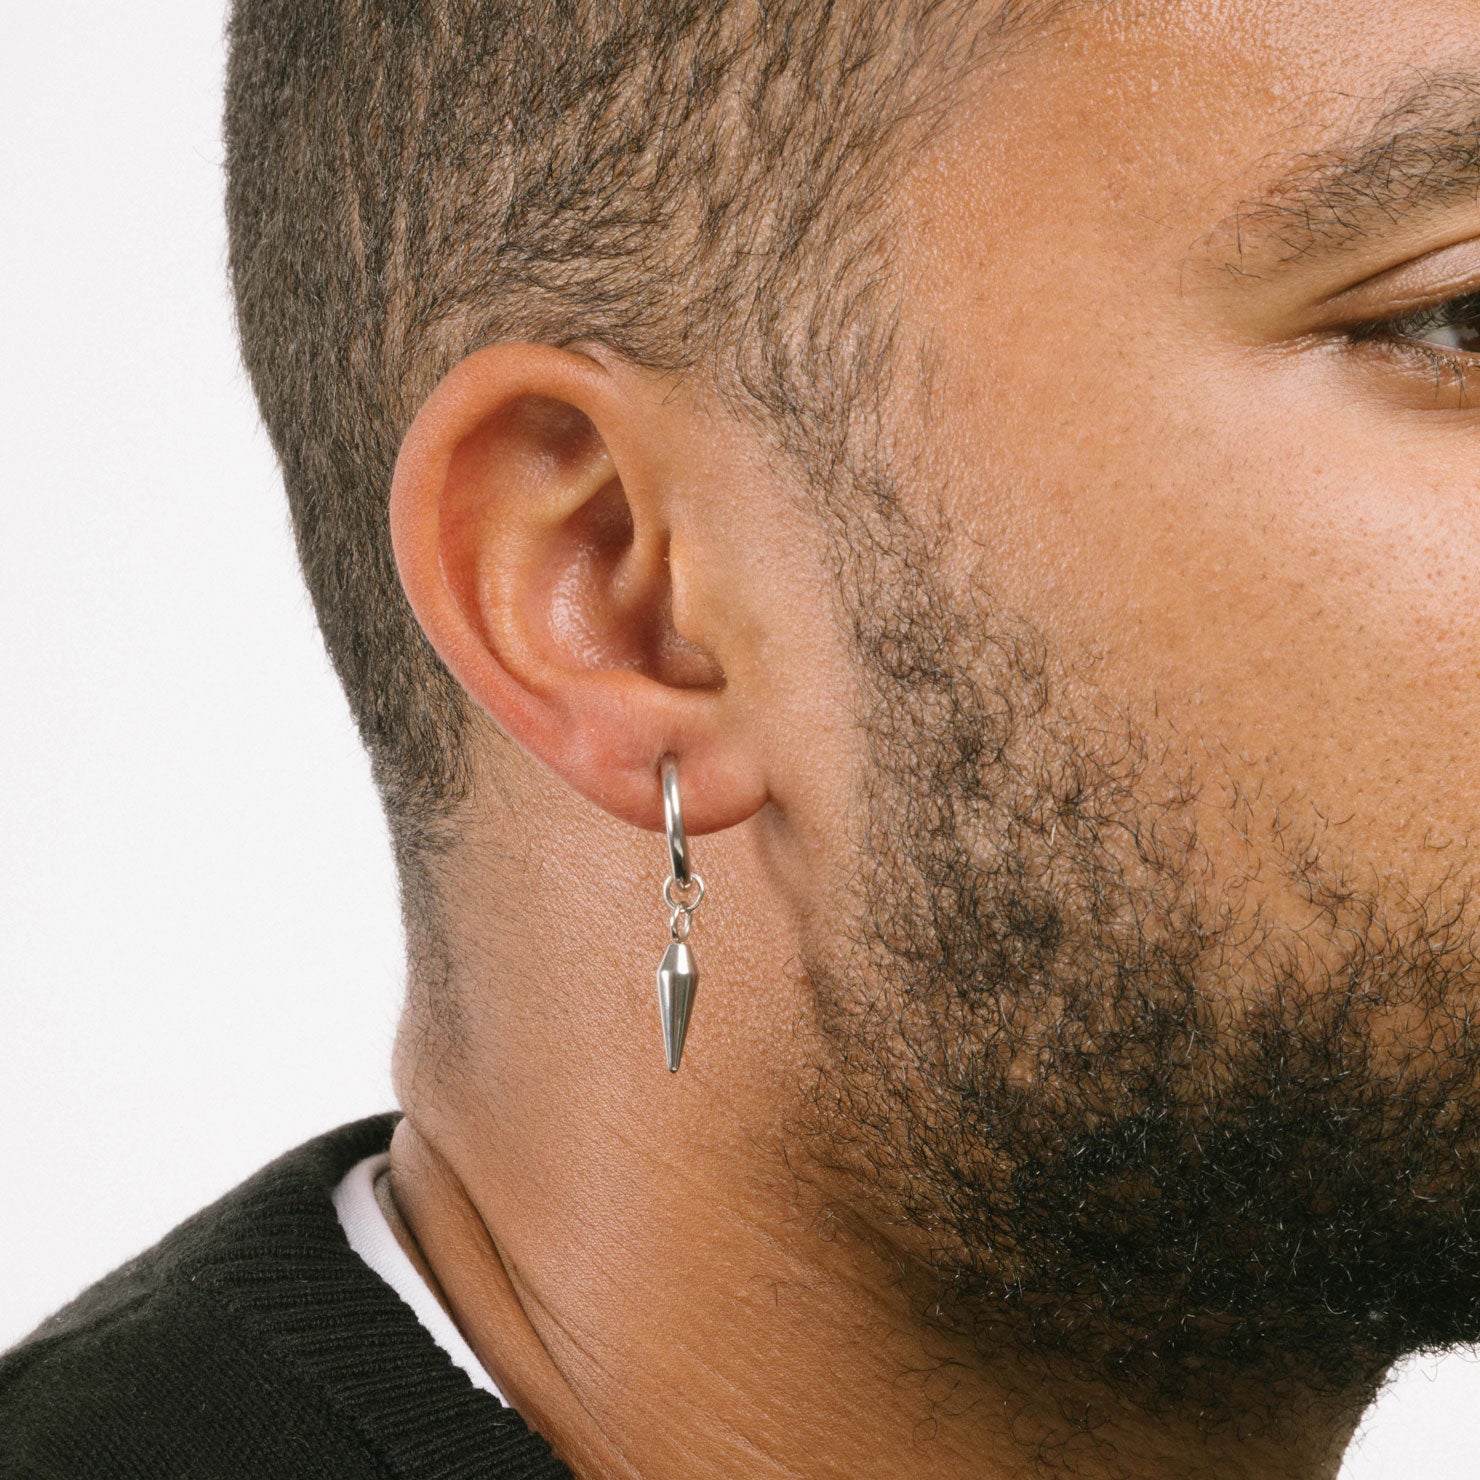 A model wearing the Dagger Clip On Earrings feature a sliding spring closure type, making them best suited to those with small or thin ears. The earrings are capable of providing a secure hold for an average of 2-4 hours, and have the ability to adjust automatically to the thickness of your earlobes. Crafted from stainless steel, each pair includes a single set of earrings.